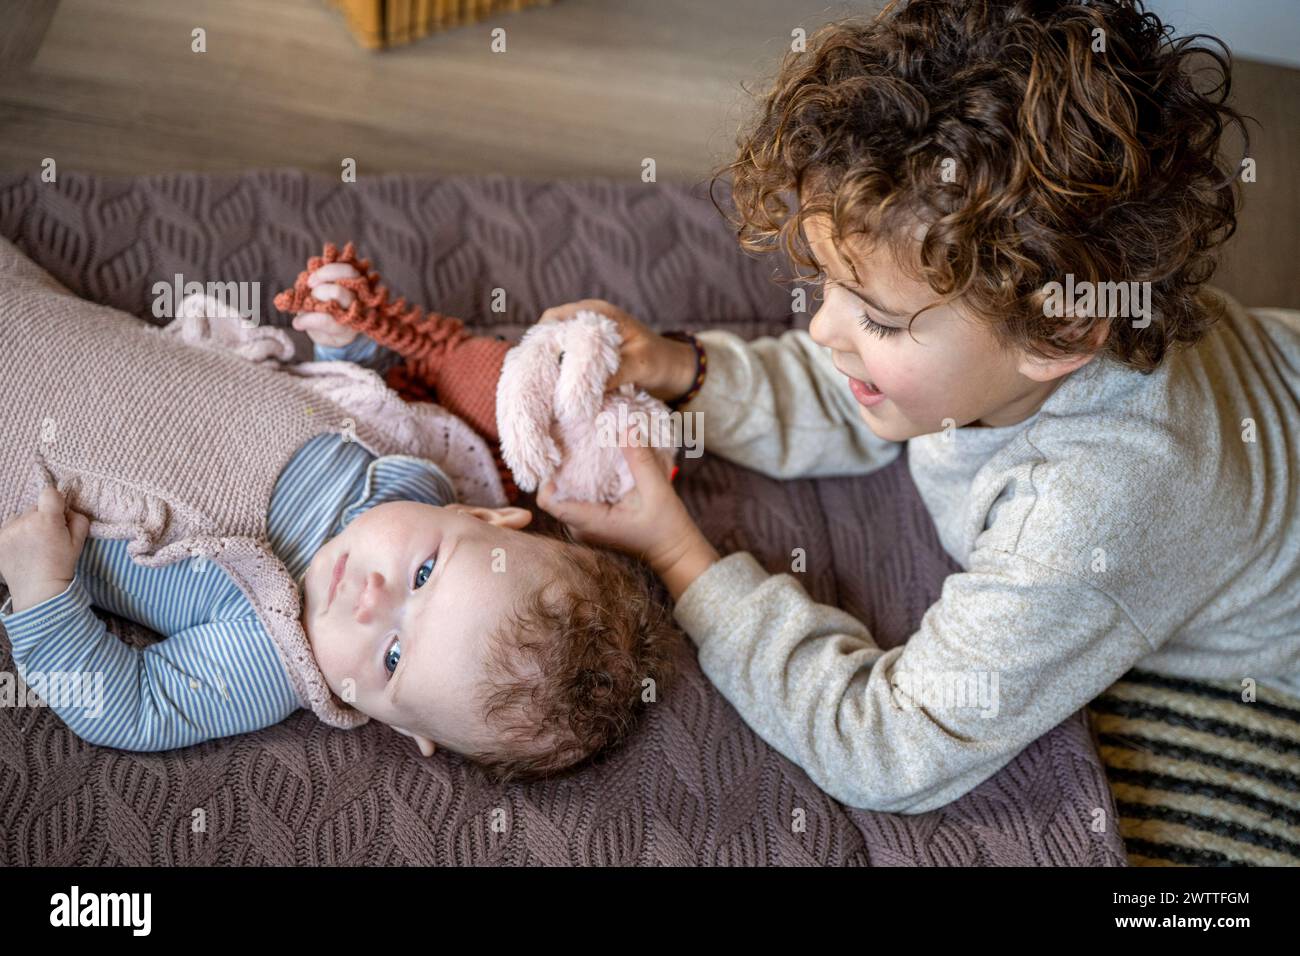 Older child tenderly interacting with their baby sibling lying on a bed. Stock Photo